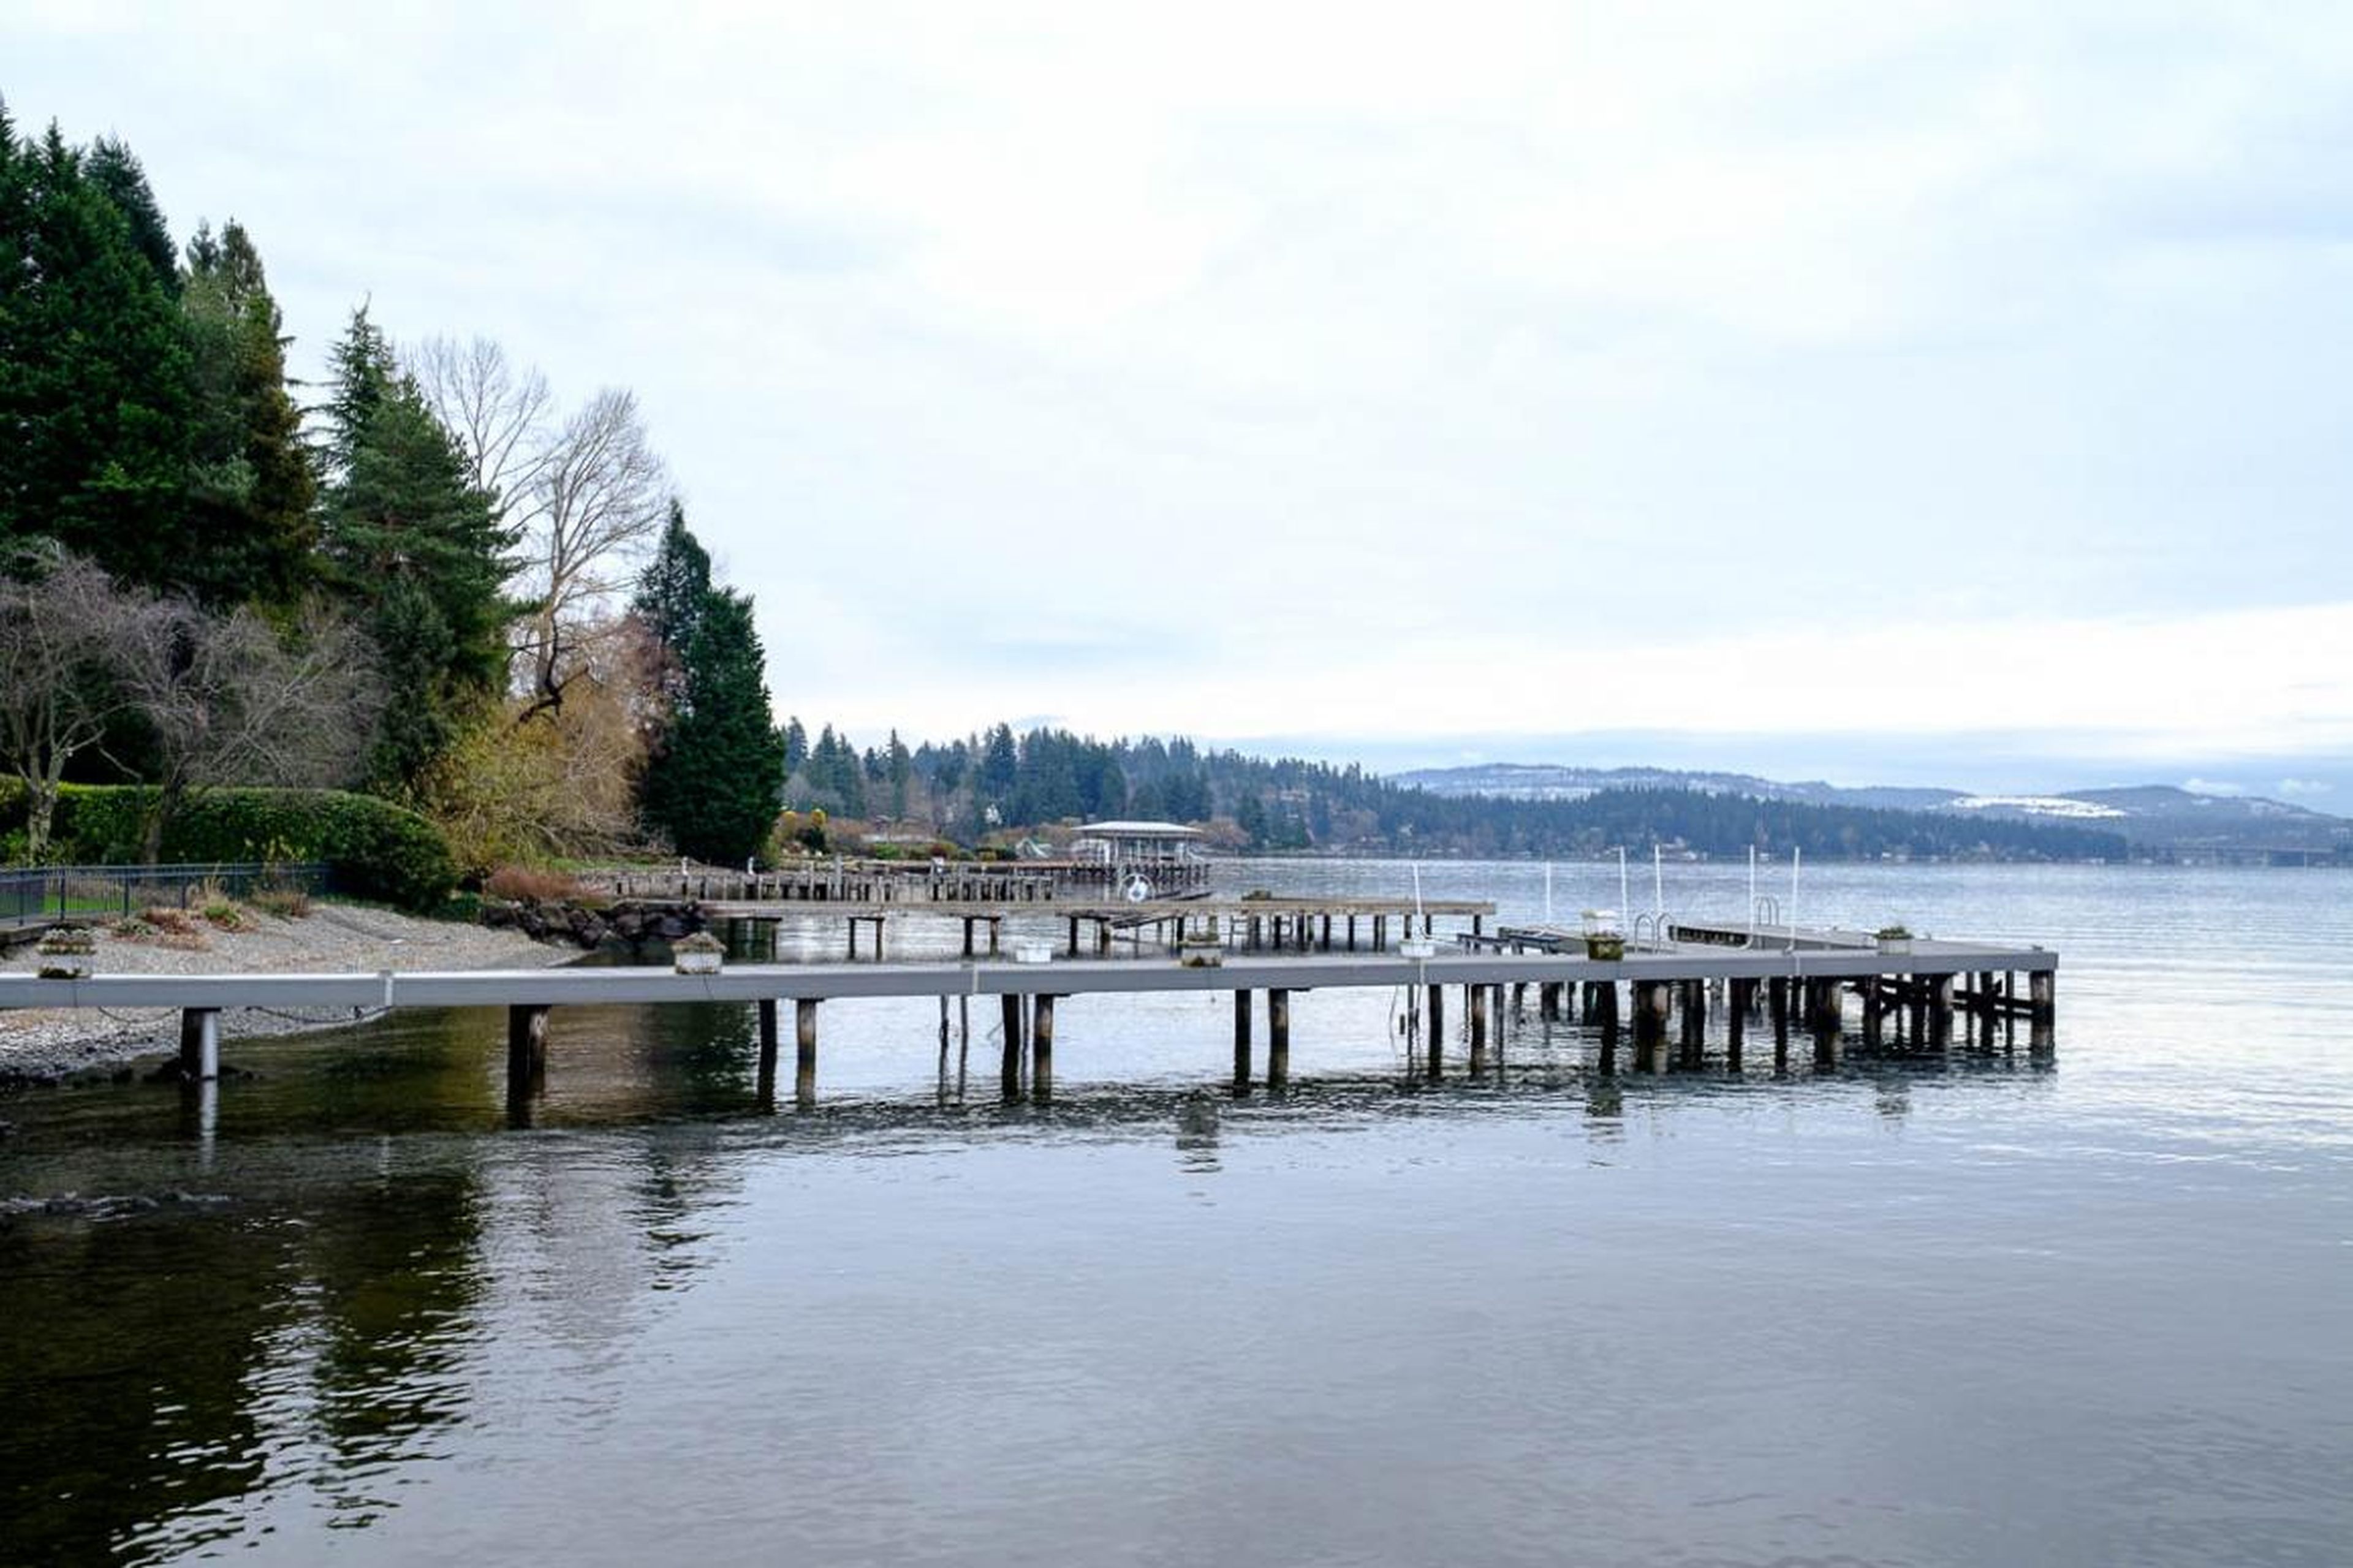 Almost all of the houses on the water in Medina have a dock and a small private beach. Lake Washington is a popular place for swimming, water sports, and boating in the summer.